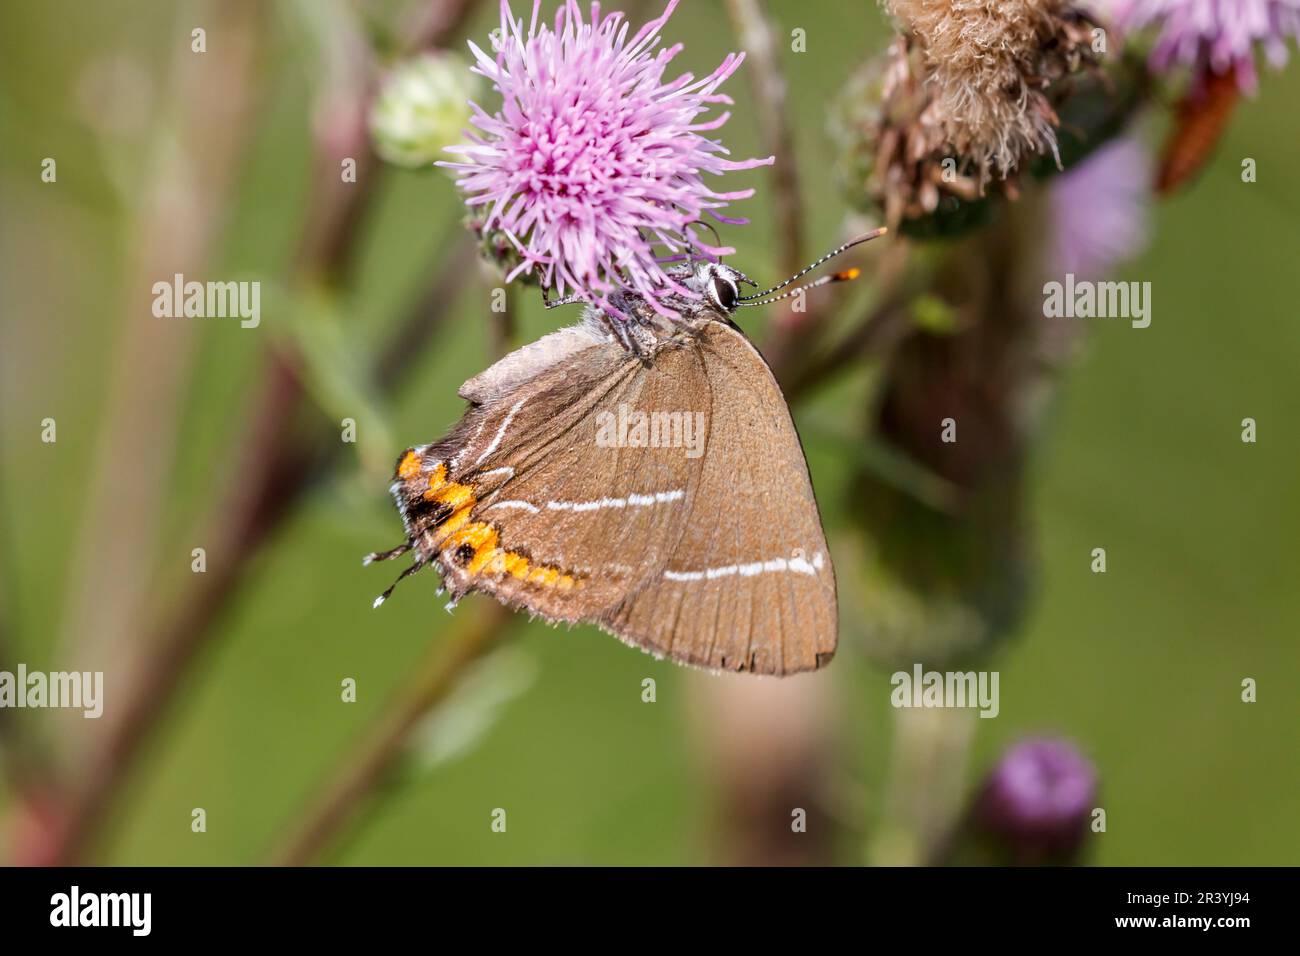 Satyrium w-album, commonly known as the White-letter hairstreak butterfly Stock Photo